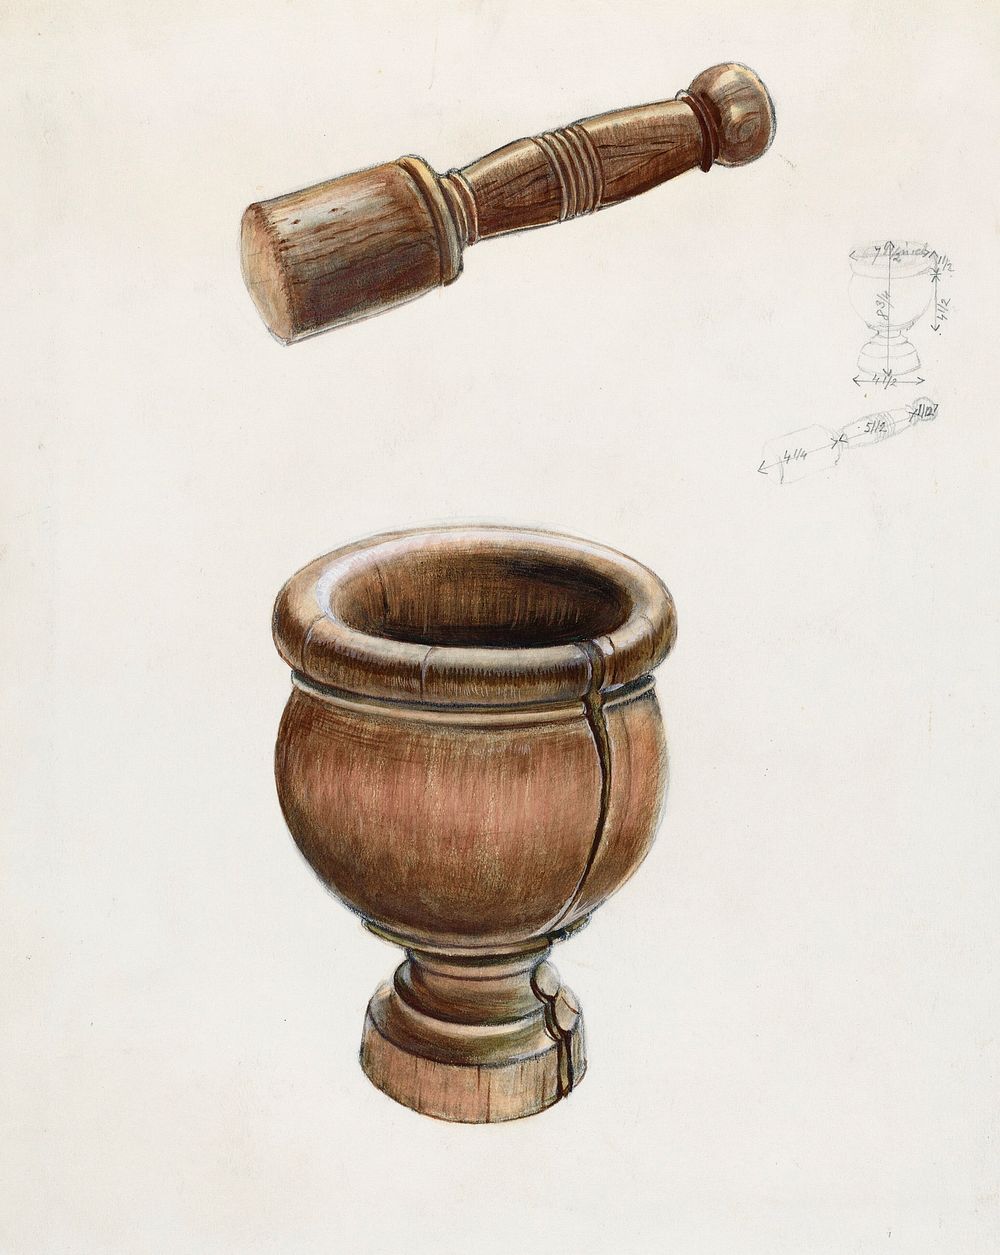 Mortar and Pestle (ca. 1936) by Ludmilla Calderon. Original from The National Gallery of Art. Digitally enhanced by rawpixel.